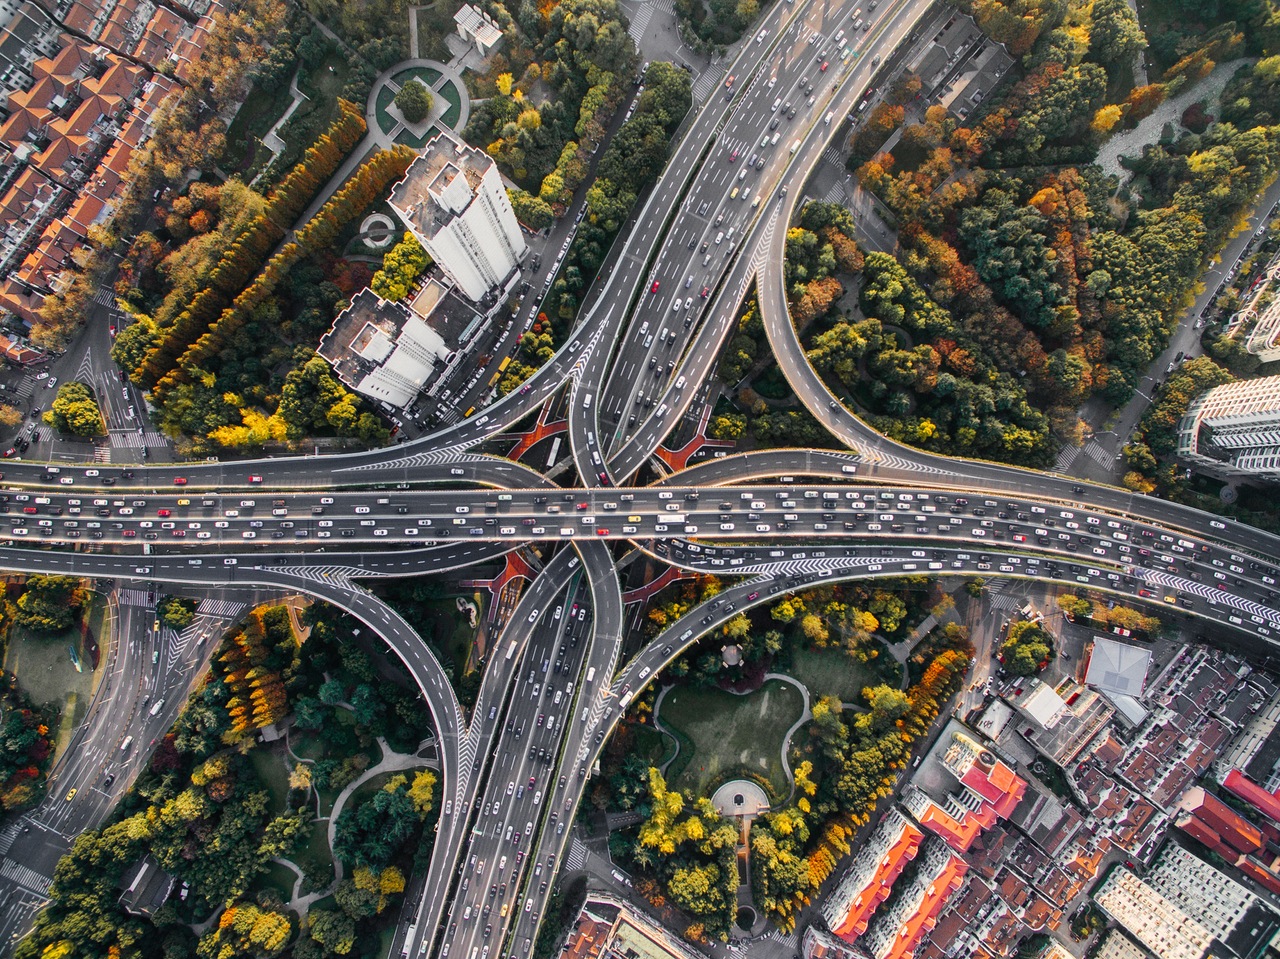 Traffic from above